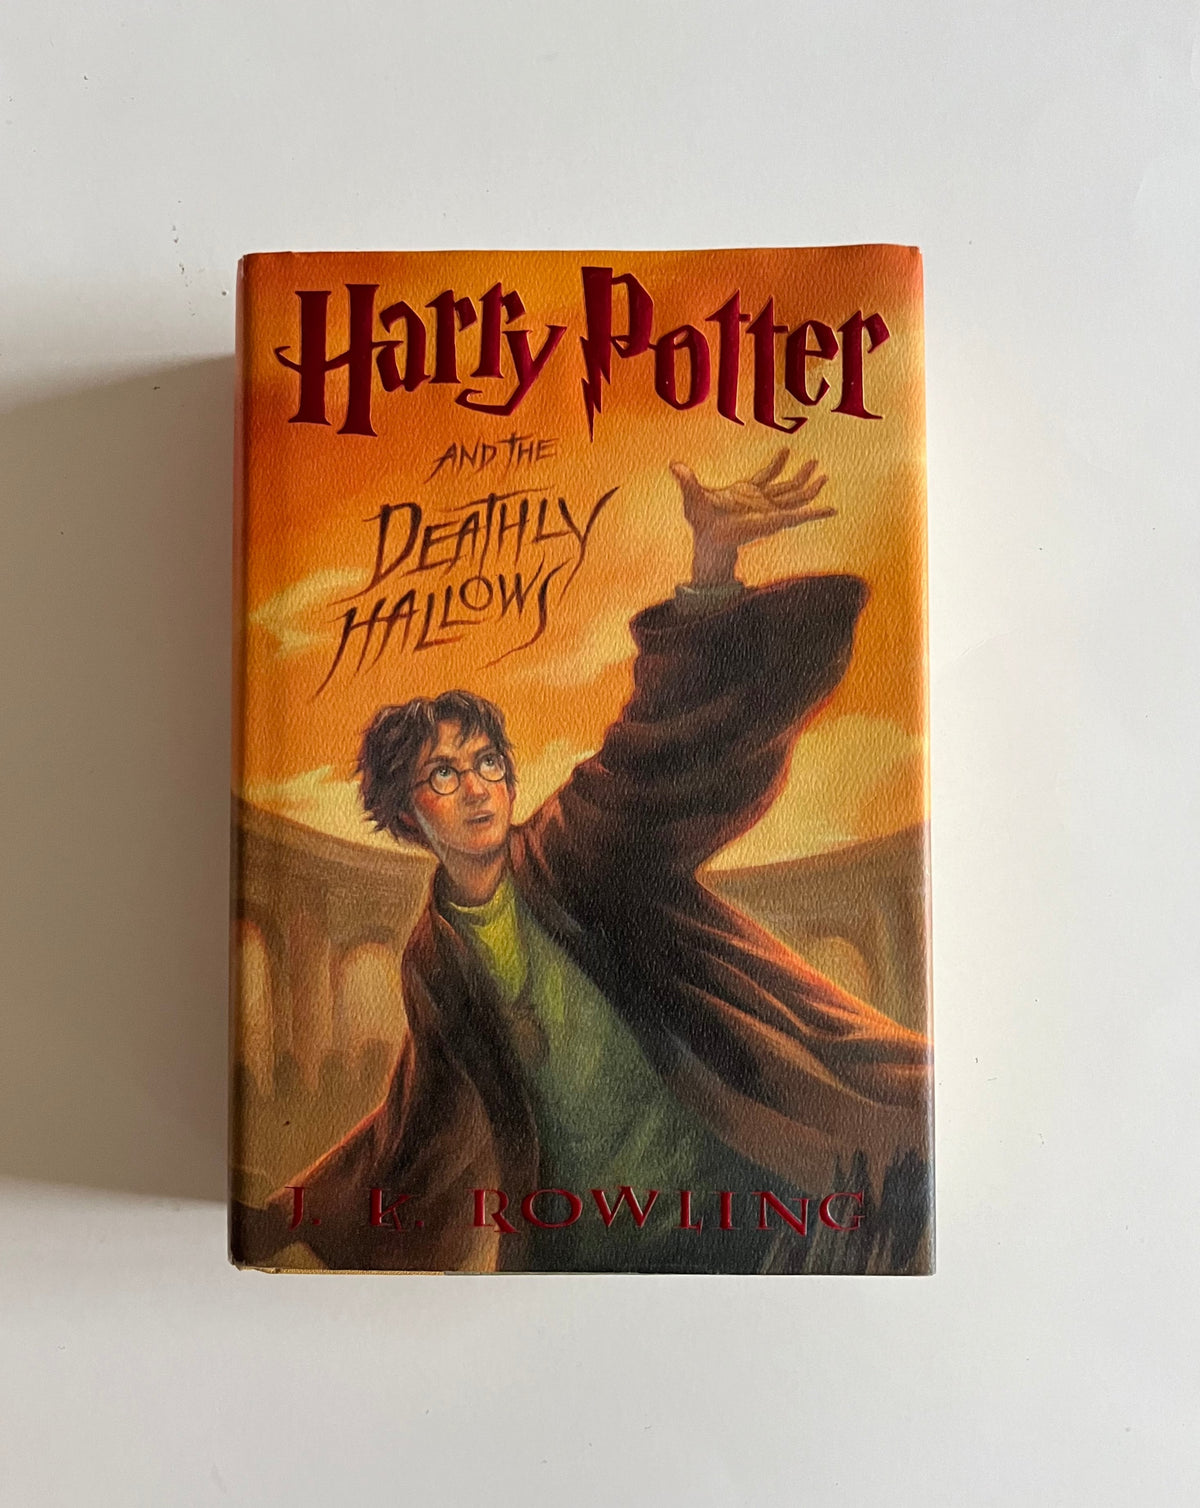 Harry Potter &amp; the Deathly Hallows by JK Rowling